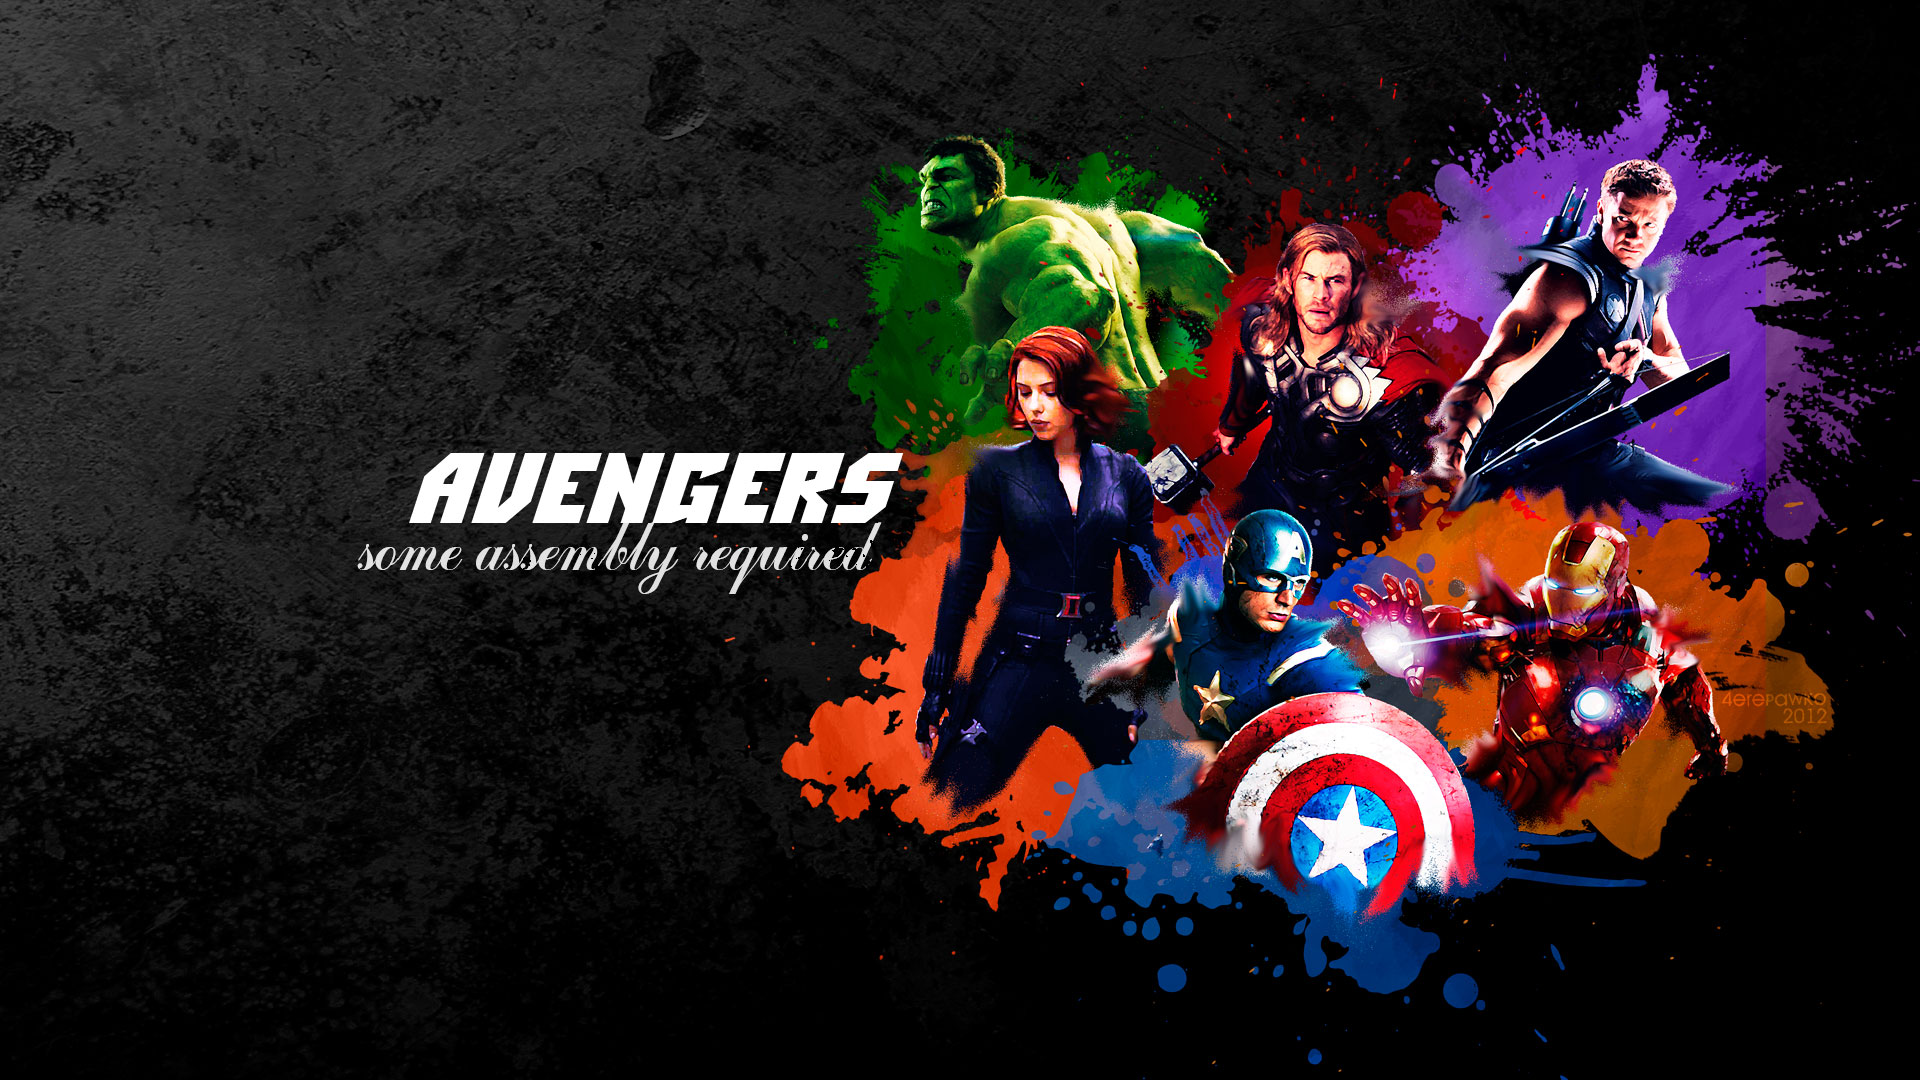 Image Avengers Wallpaper As Desktop Pc Android iPhone And